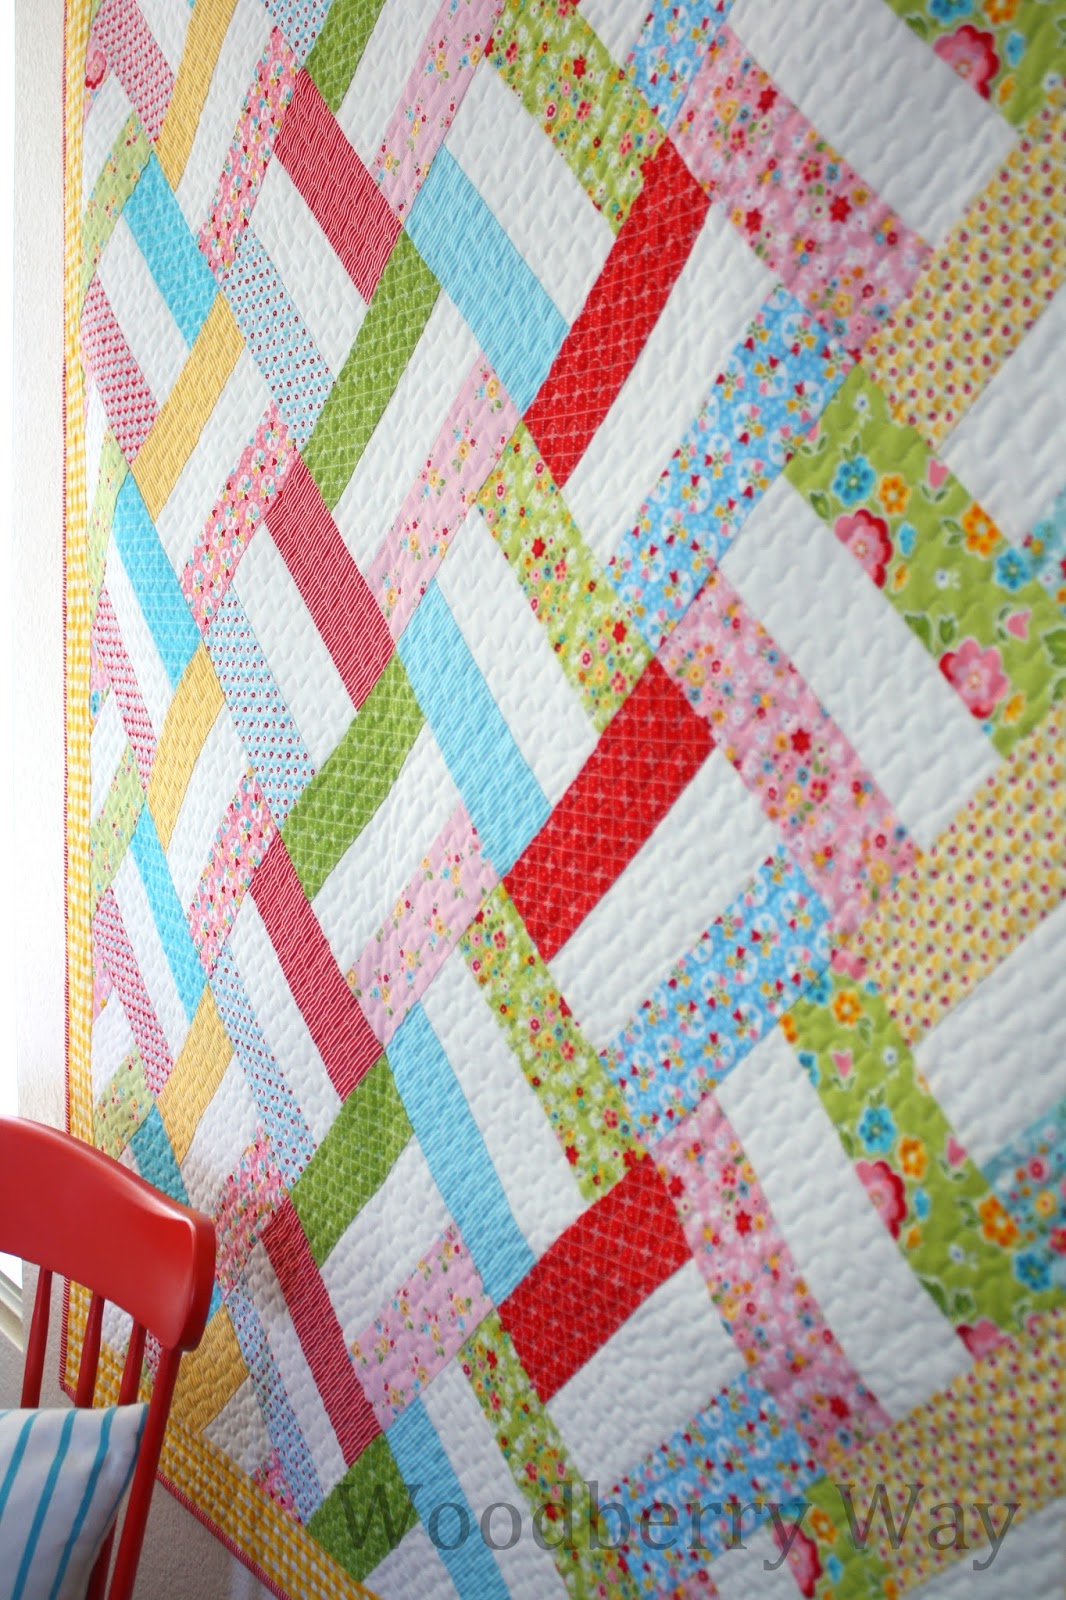 45 Free Quilt Patterns for Beginners  Quilting designs patterns, Quilt  sewing patterns, Quilt patterns free